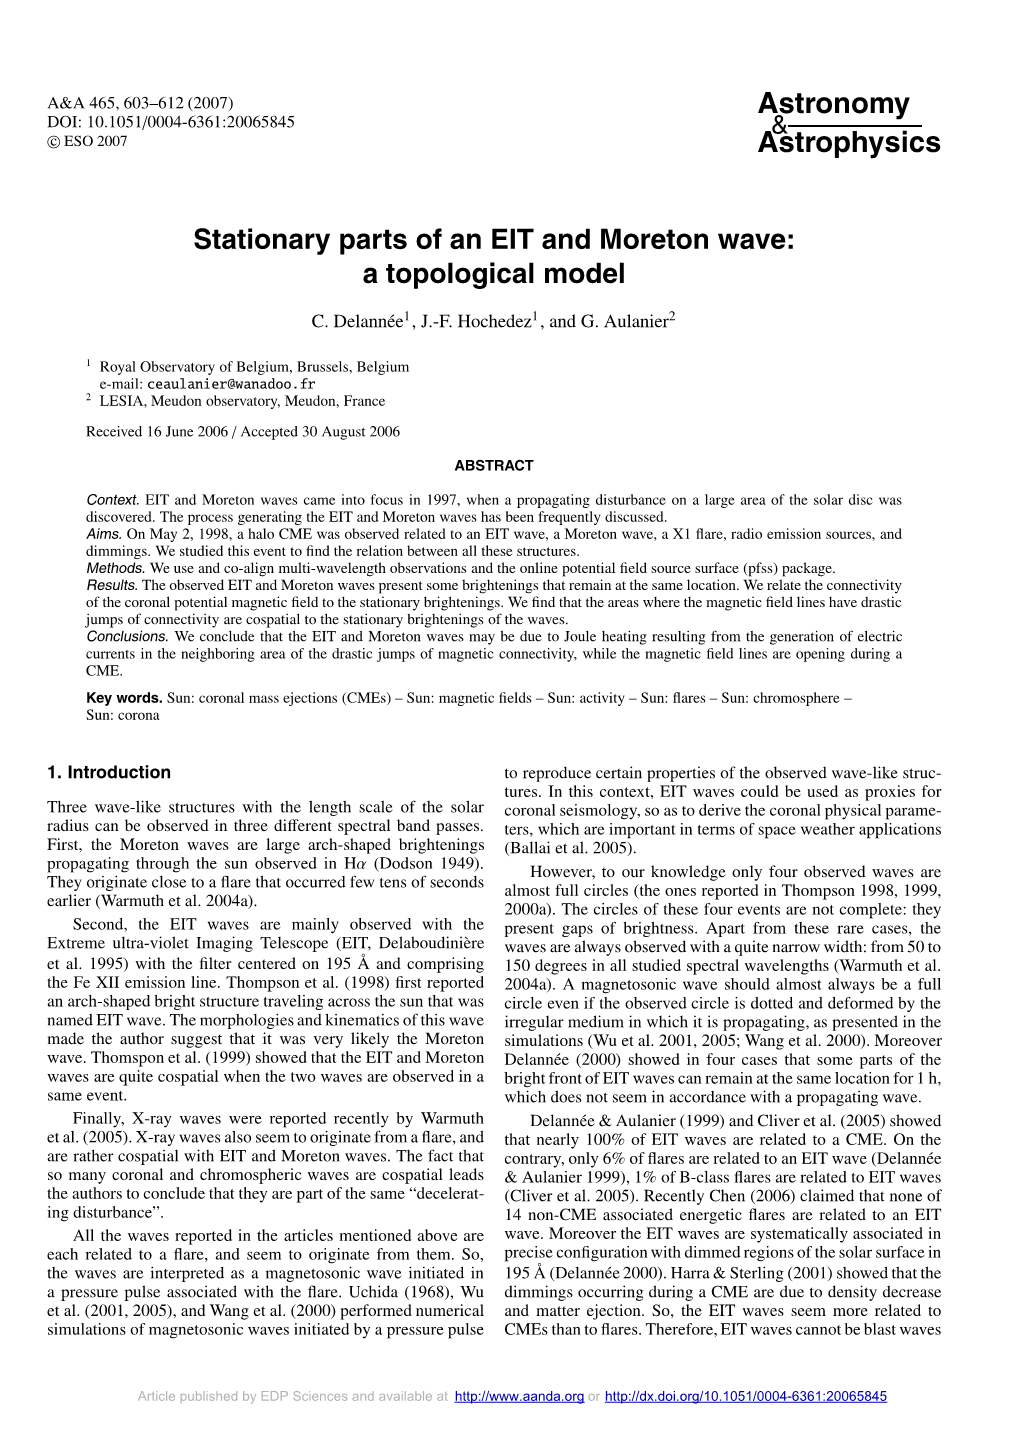 Stationary Parts of an EIT and Moreton Wave: a Topological Model